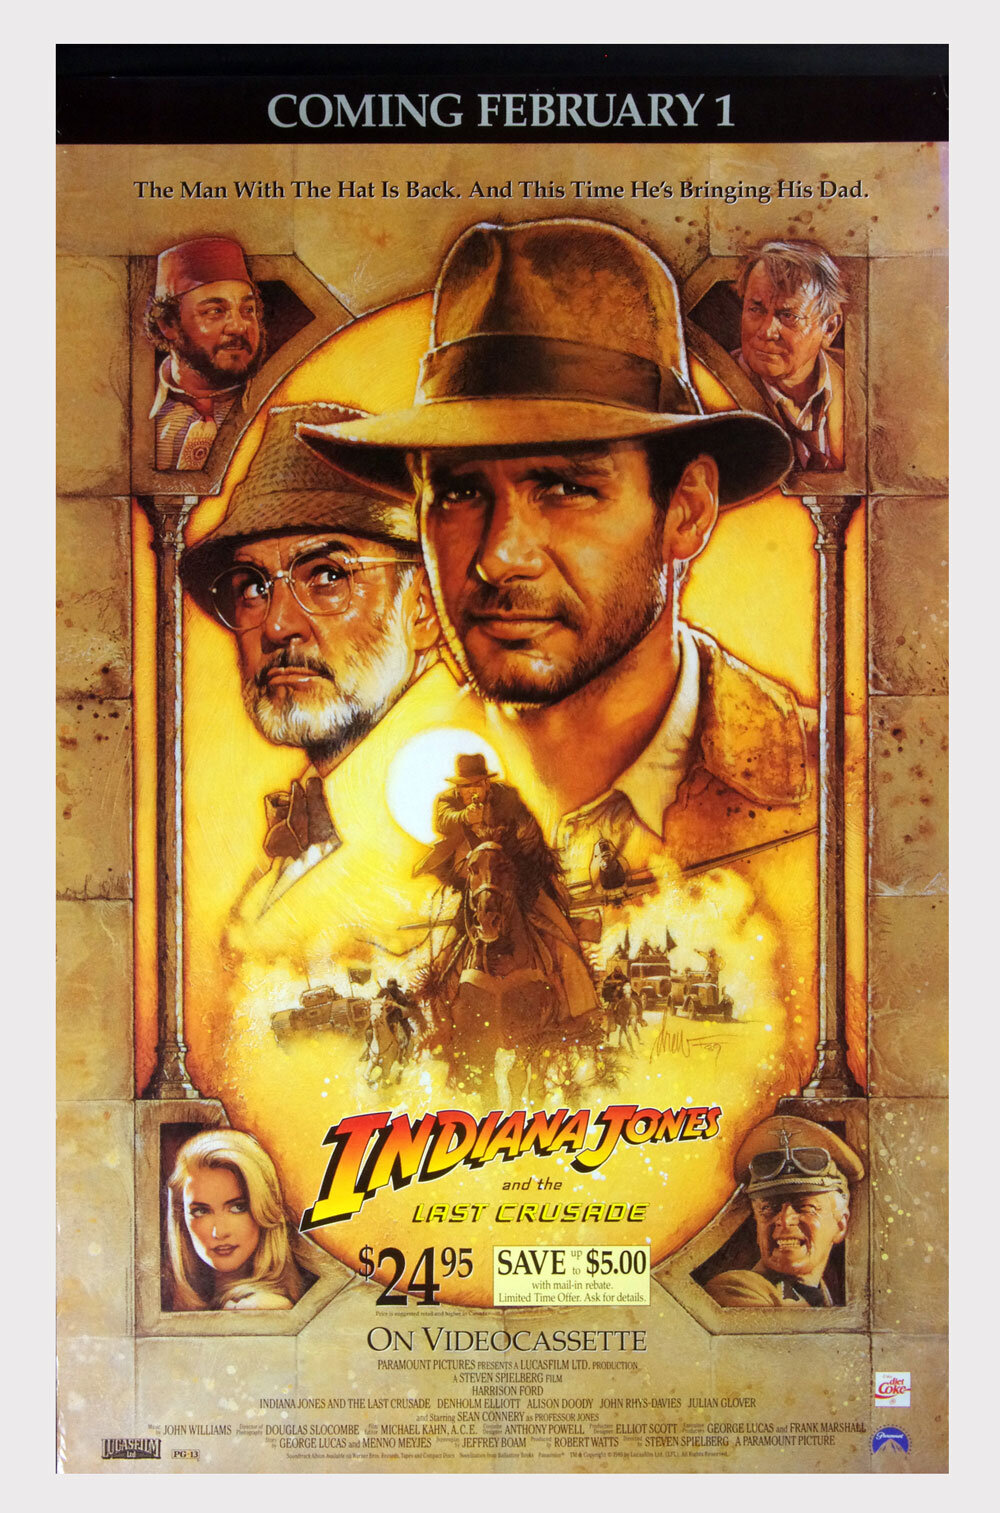 Indiana Jones and the Last Crusade Poster 1989 Home Video Promotion